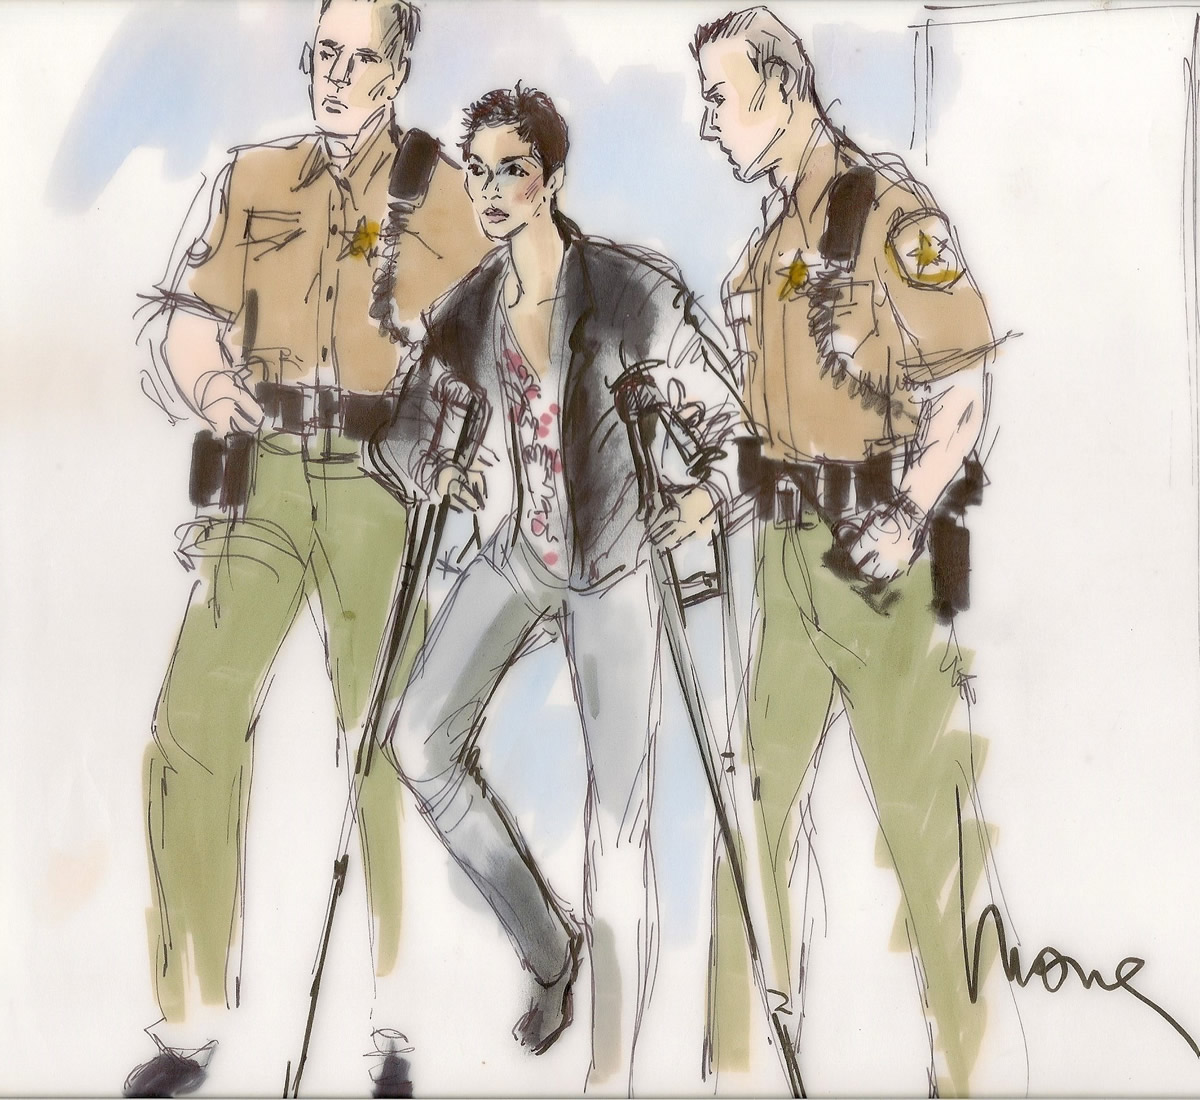 Halle Berry Child Custody Hearing Courtroom Illustration